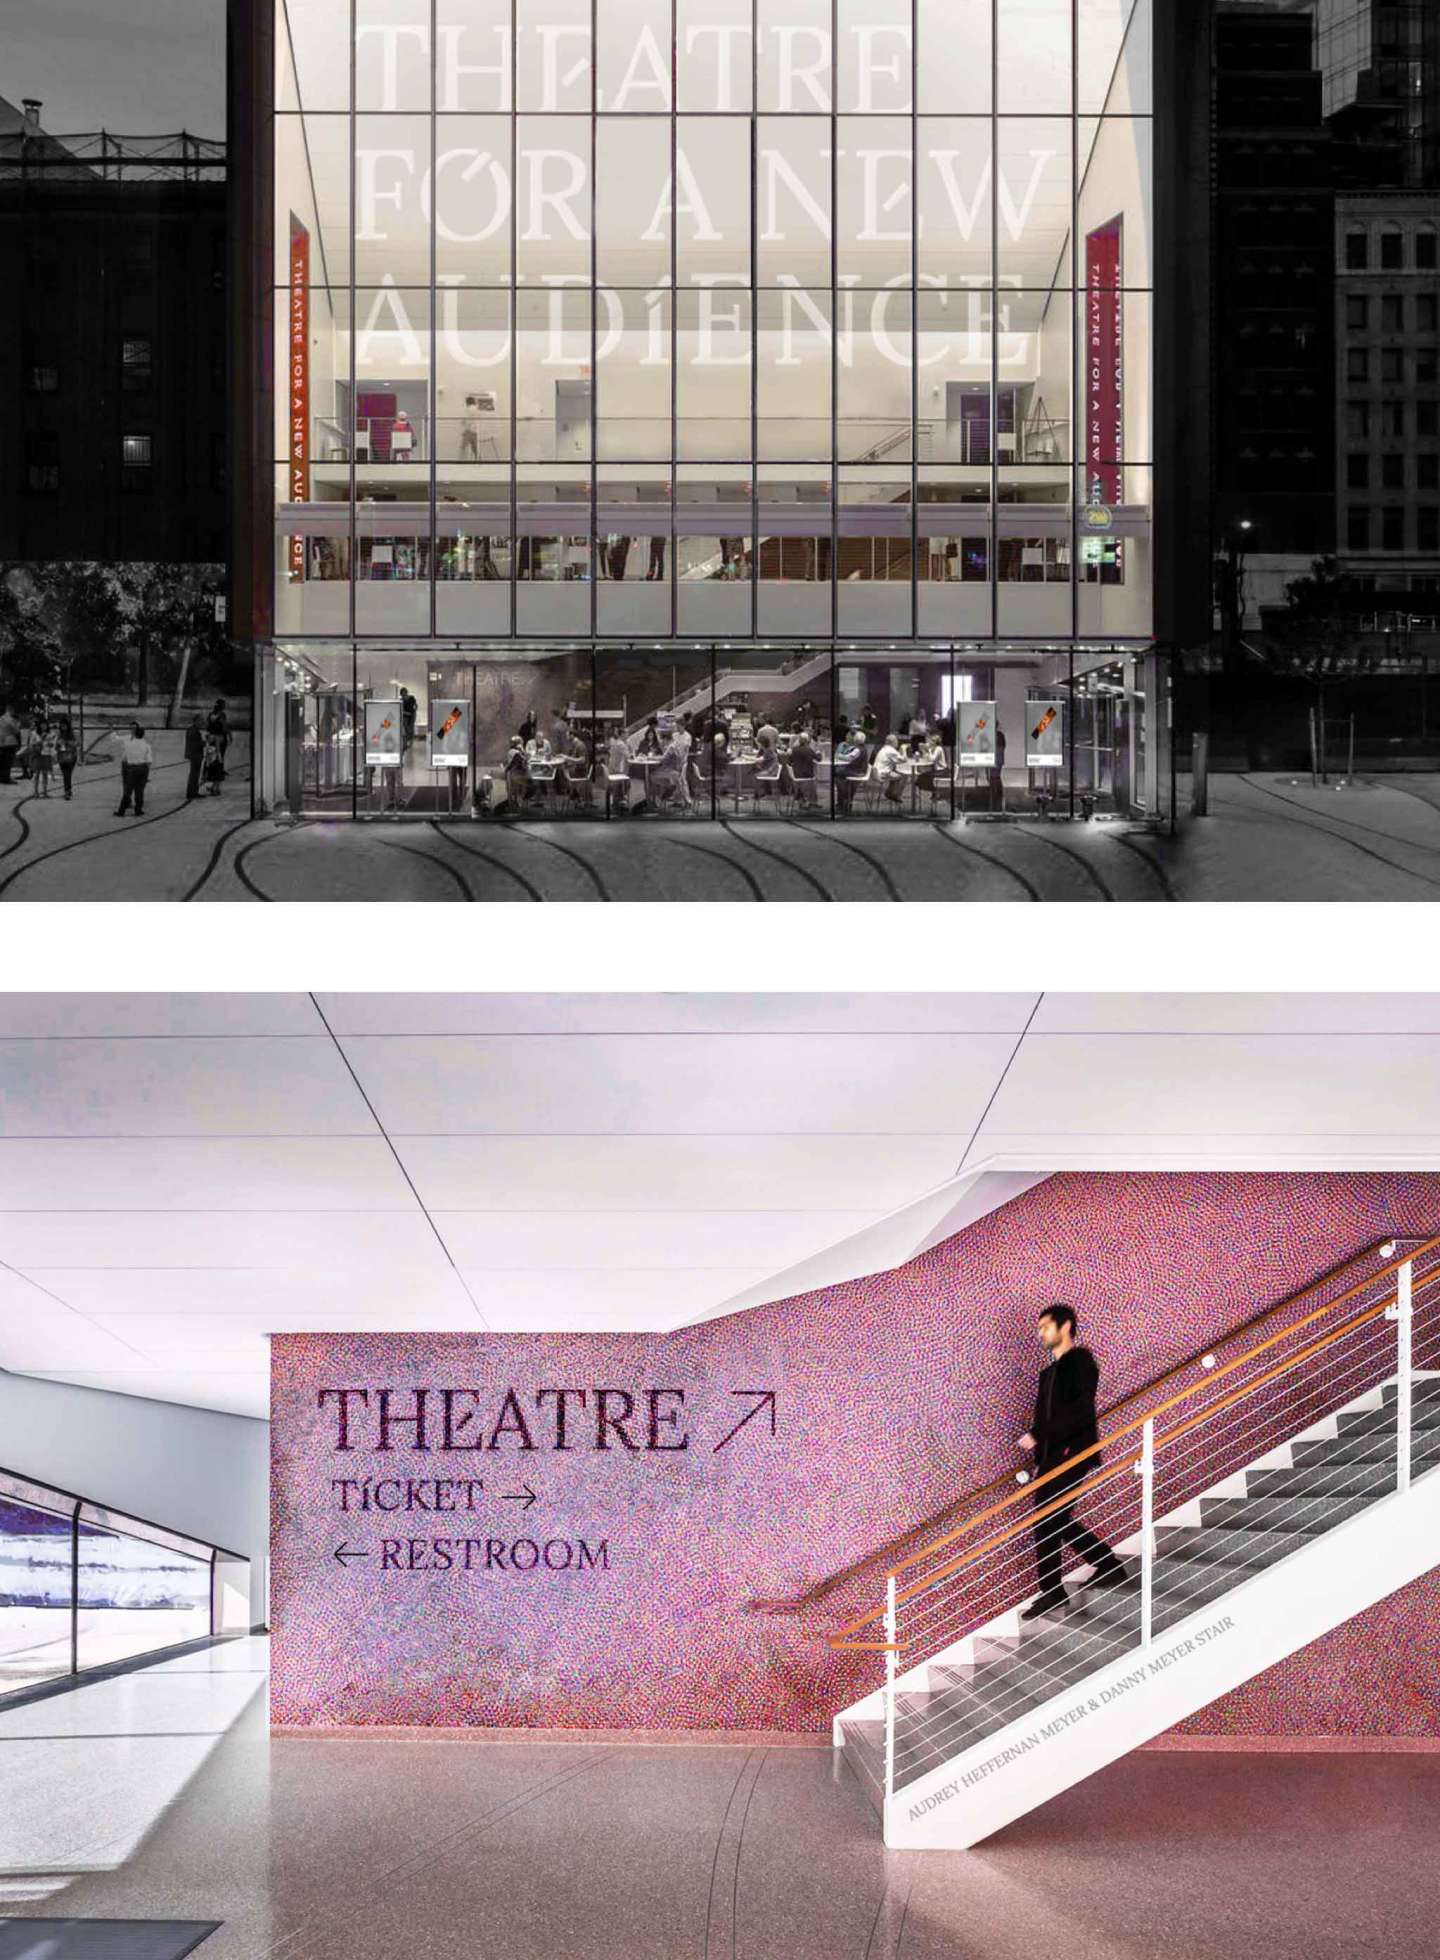 Theatre For A New Audience